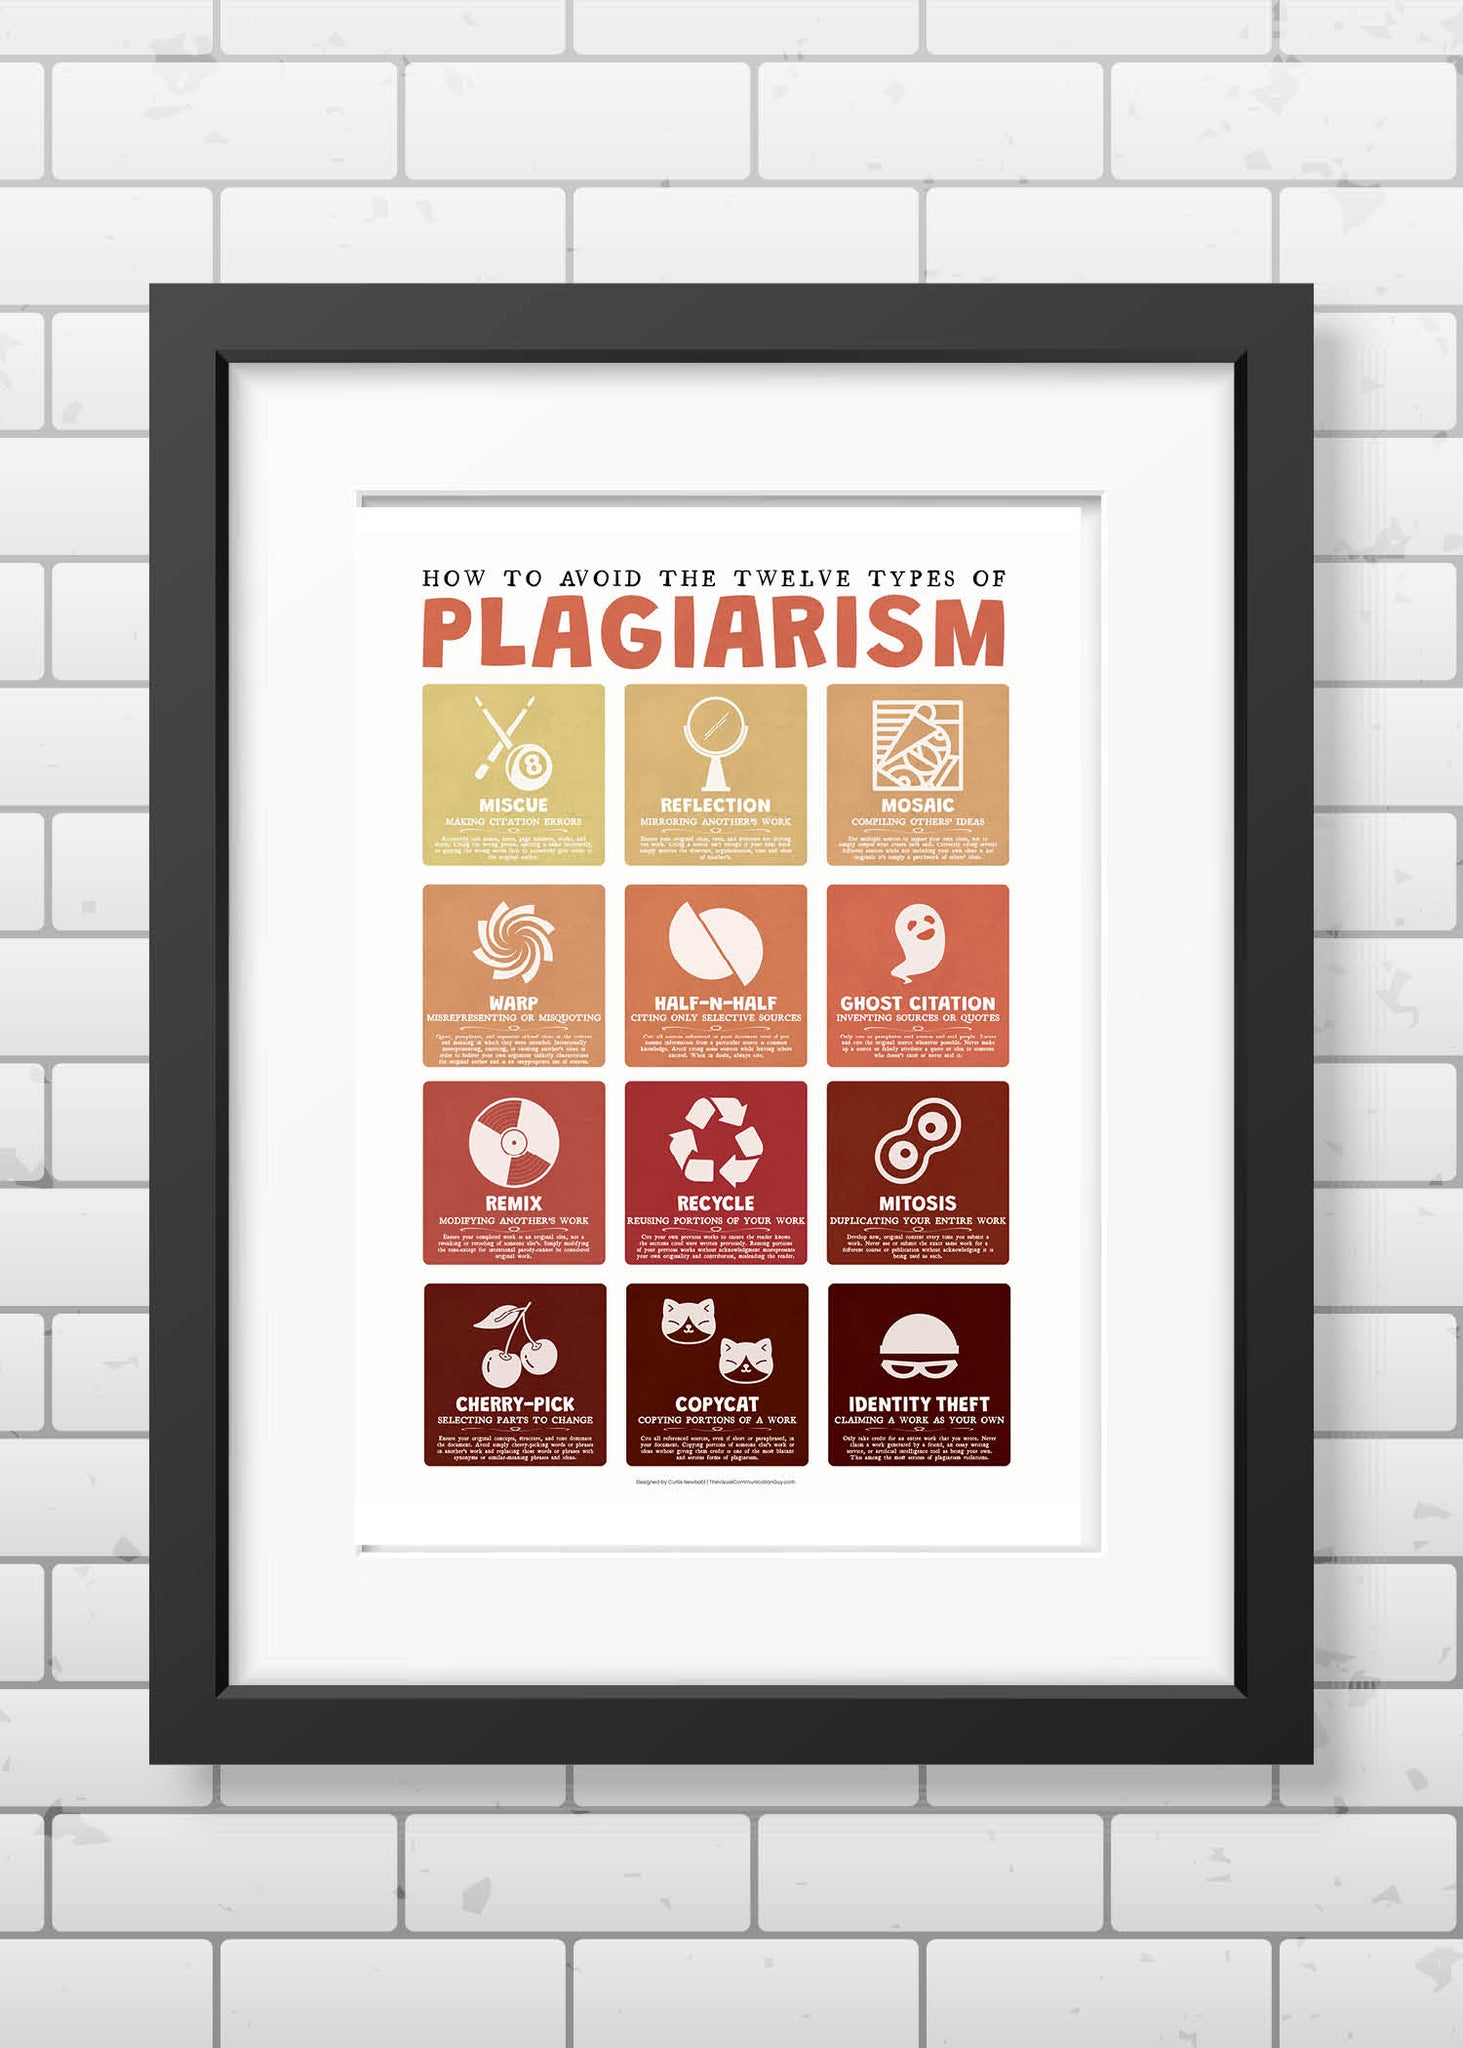 How to Avoid the Twelve Types of Plagiarism 20x30 Poster Print